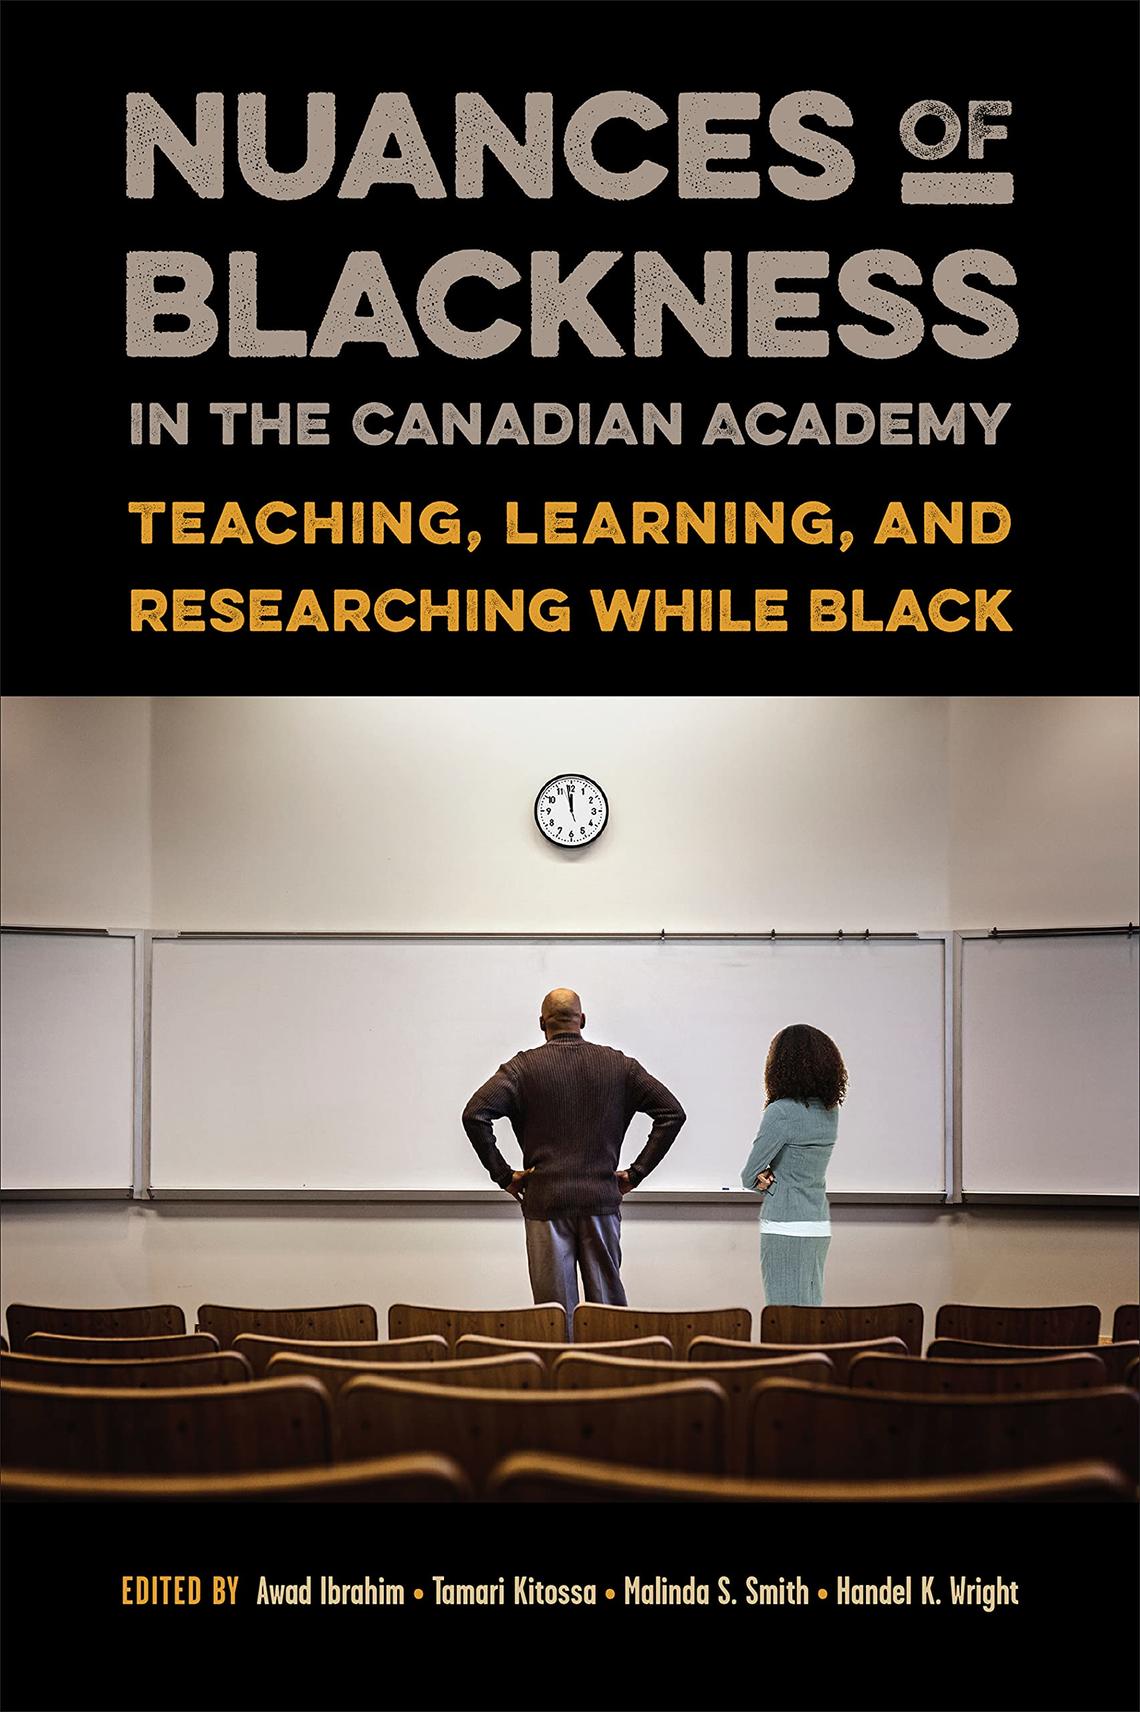 Nuances of Blackness in the Canadian Academy: Teaching, Learning, and Researching while Black (U of Toronto Press, 2022)